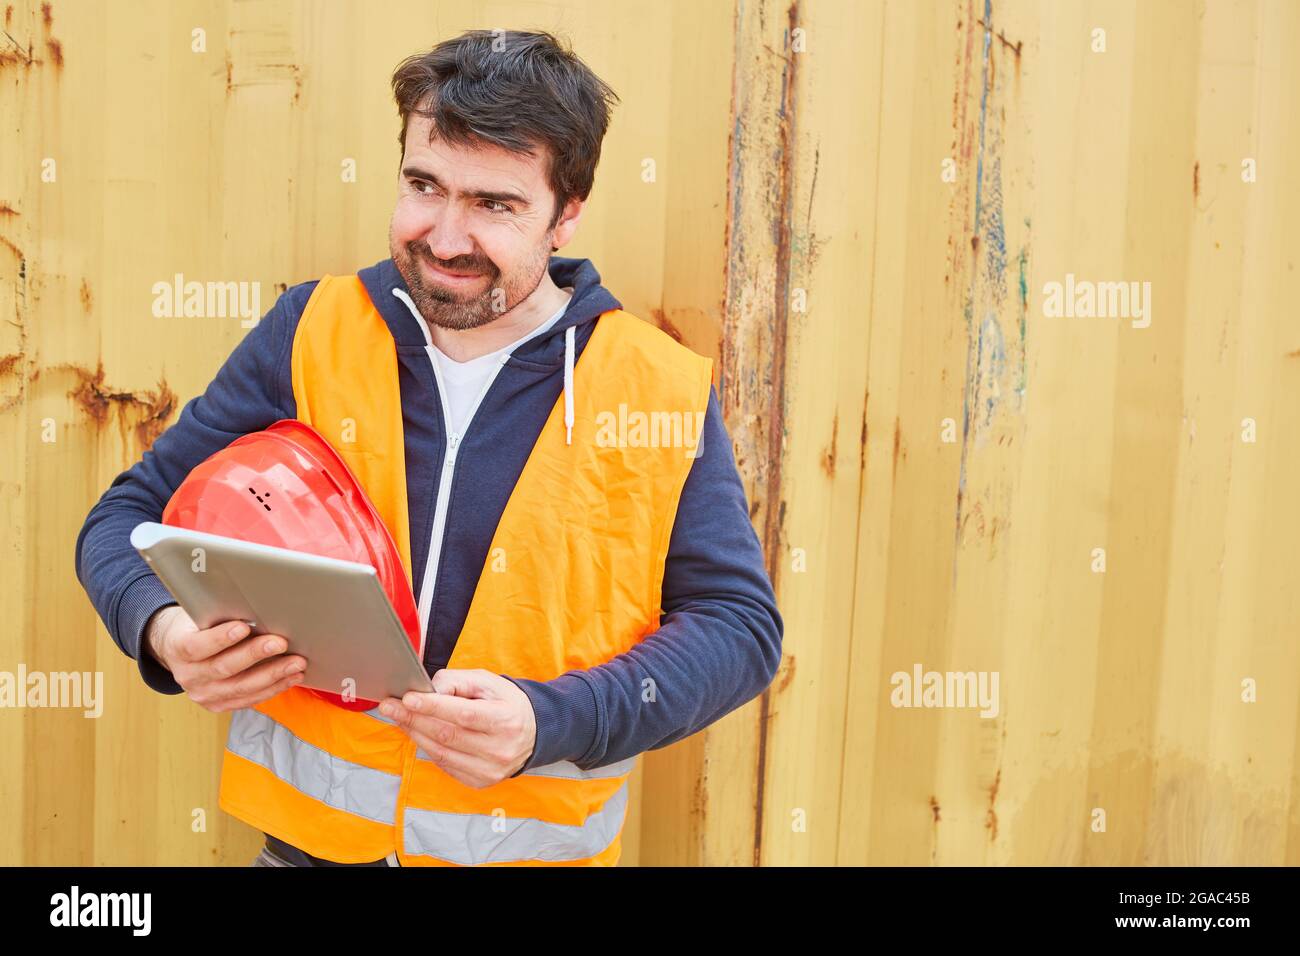 Craftsman or architect in safety vest with tablet computer during construction project planning Stock Photo